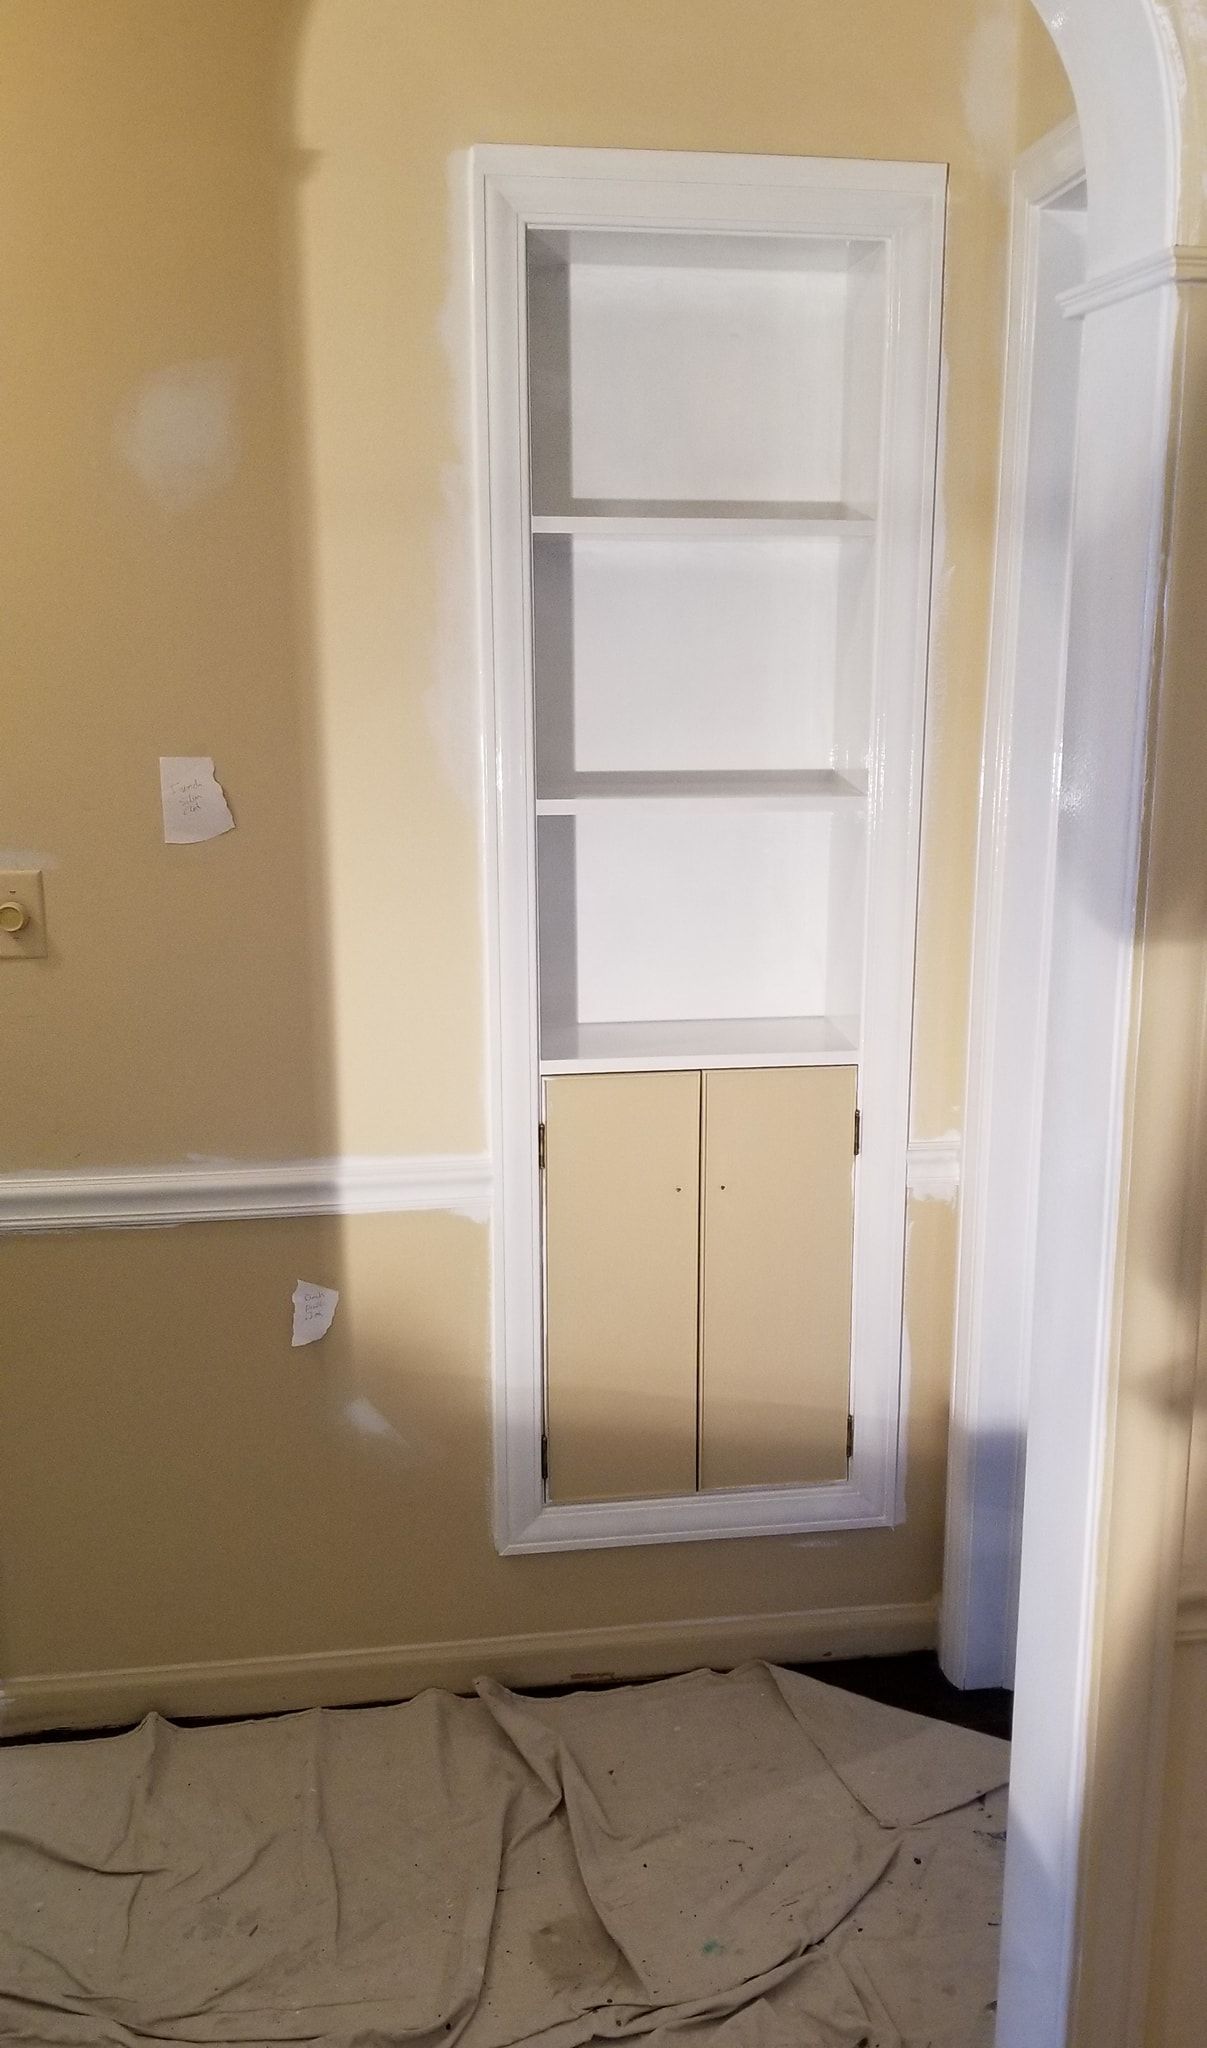 A room with a shelf in the wall and a door.